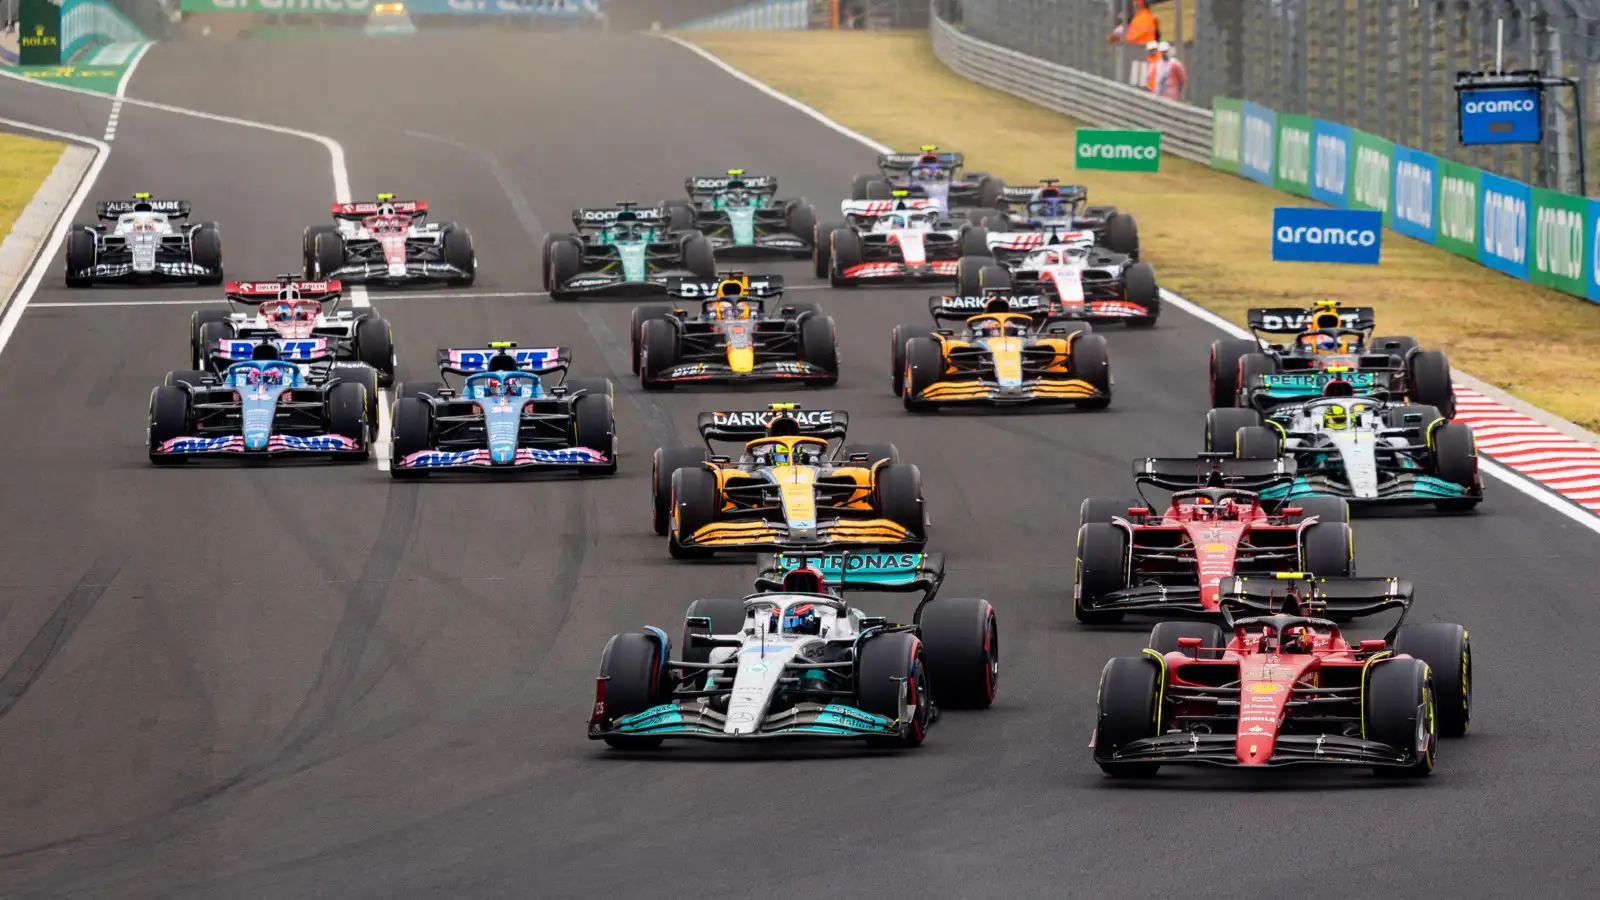 The race start of the 2022 Hungarian Grand Prix. Budapest, July 2022.